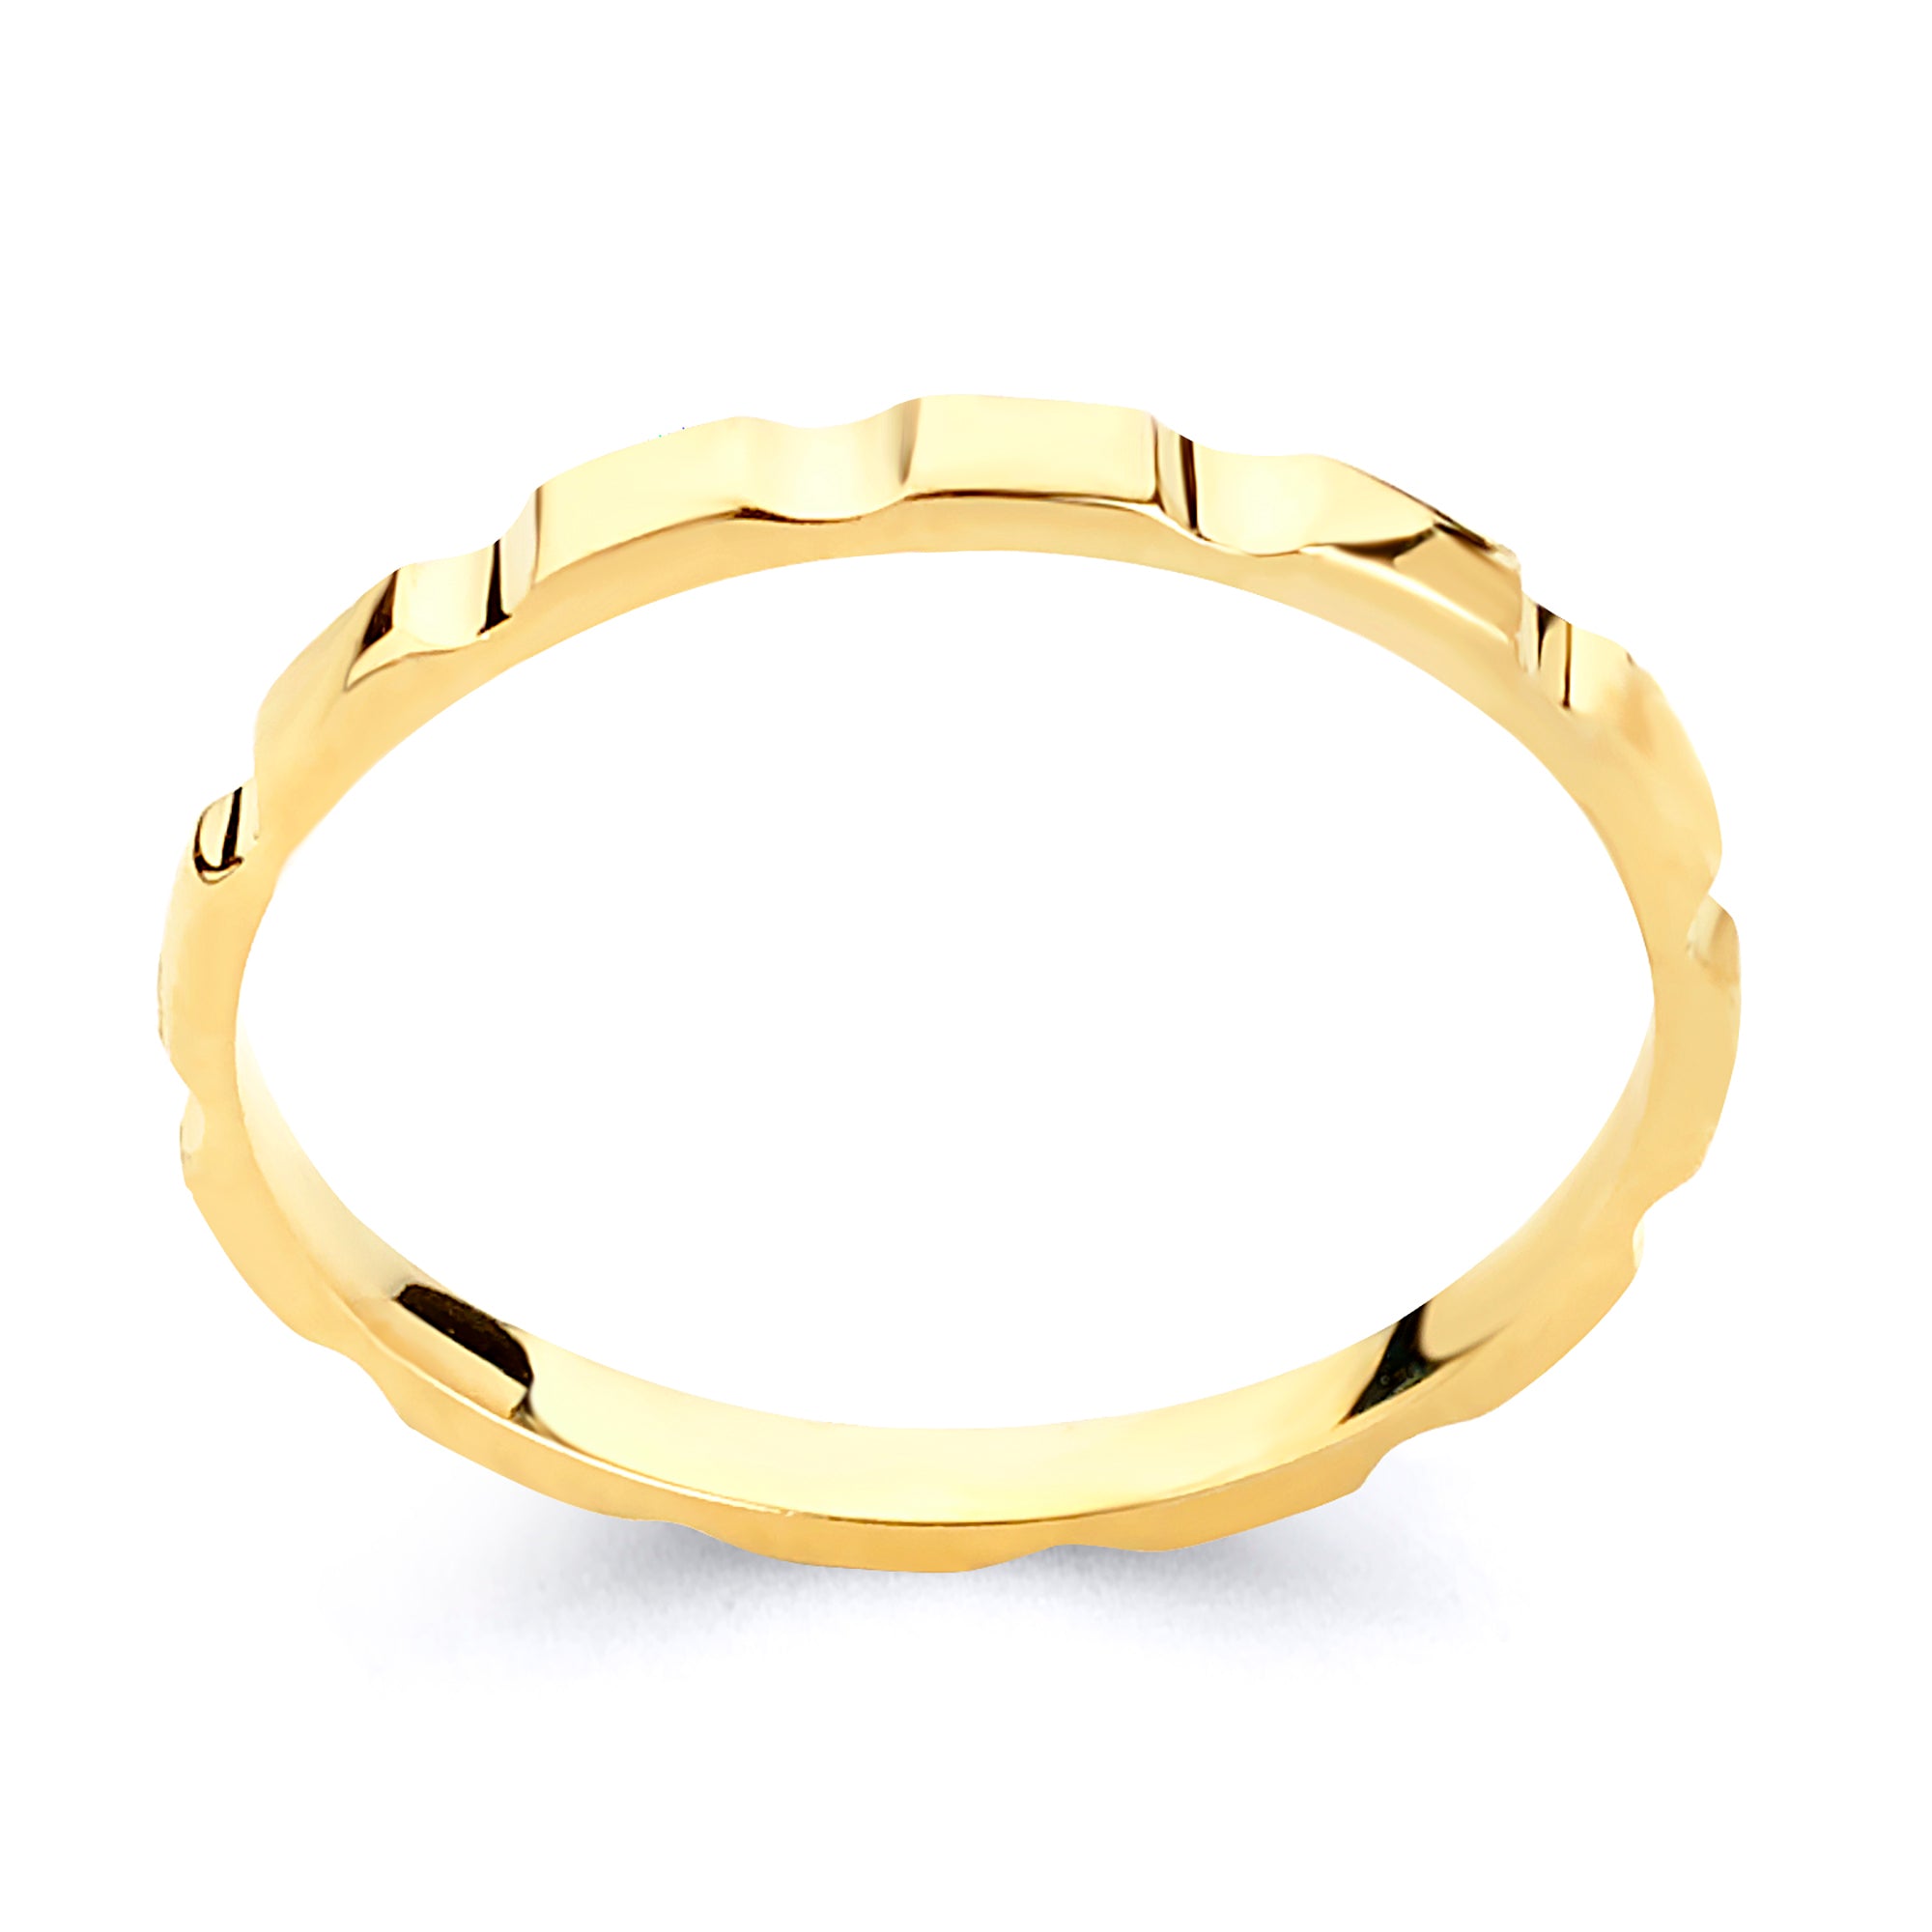 Solid Gold Eternity Stack Ring - 10k or 14k